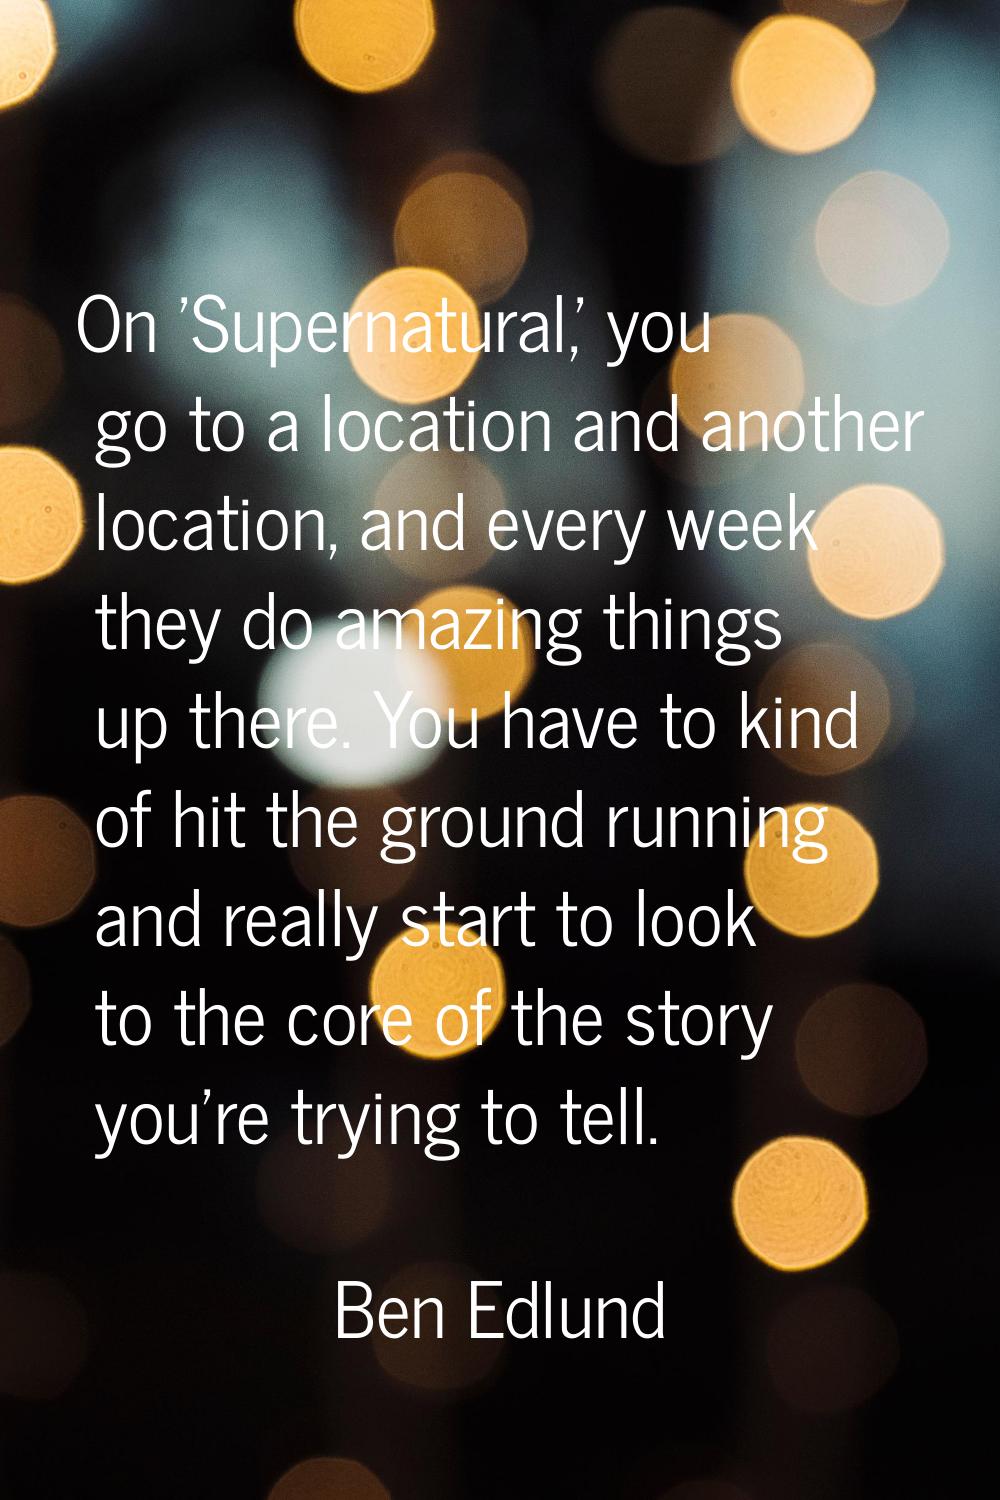 On 'Supernatural,' you go to a location and another location, and every week they do amazing things